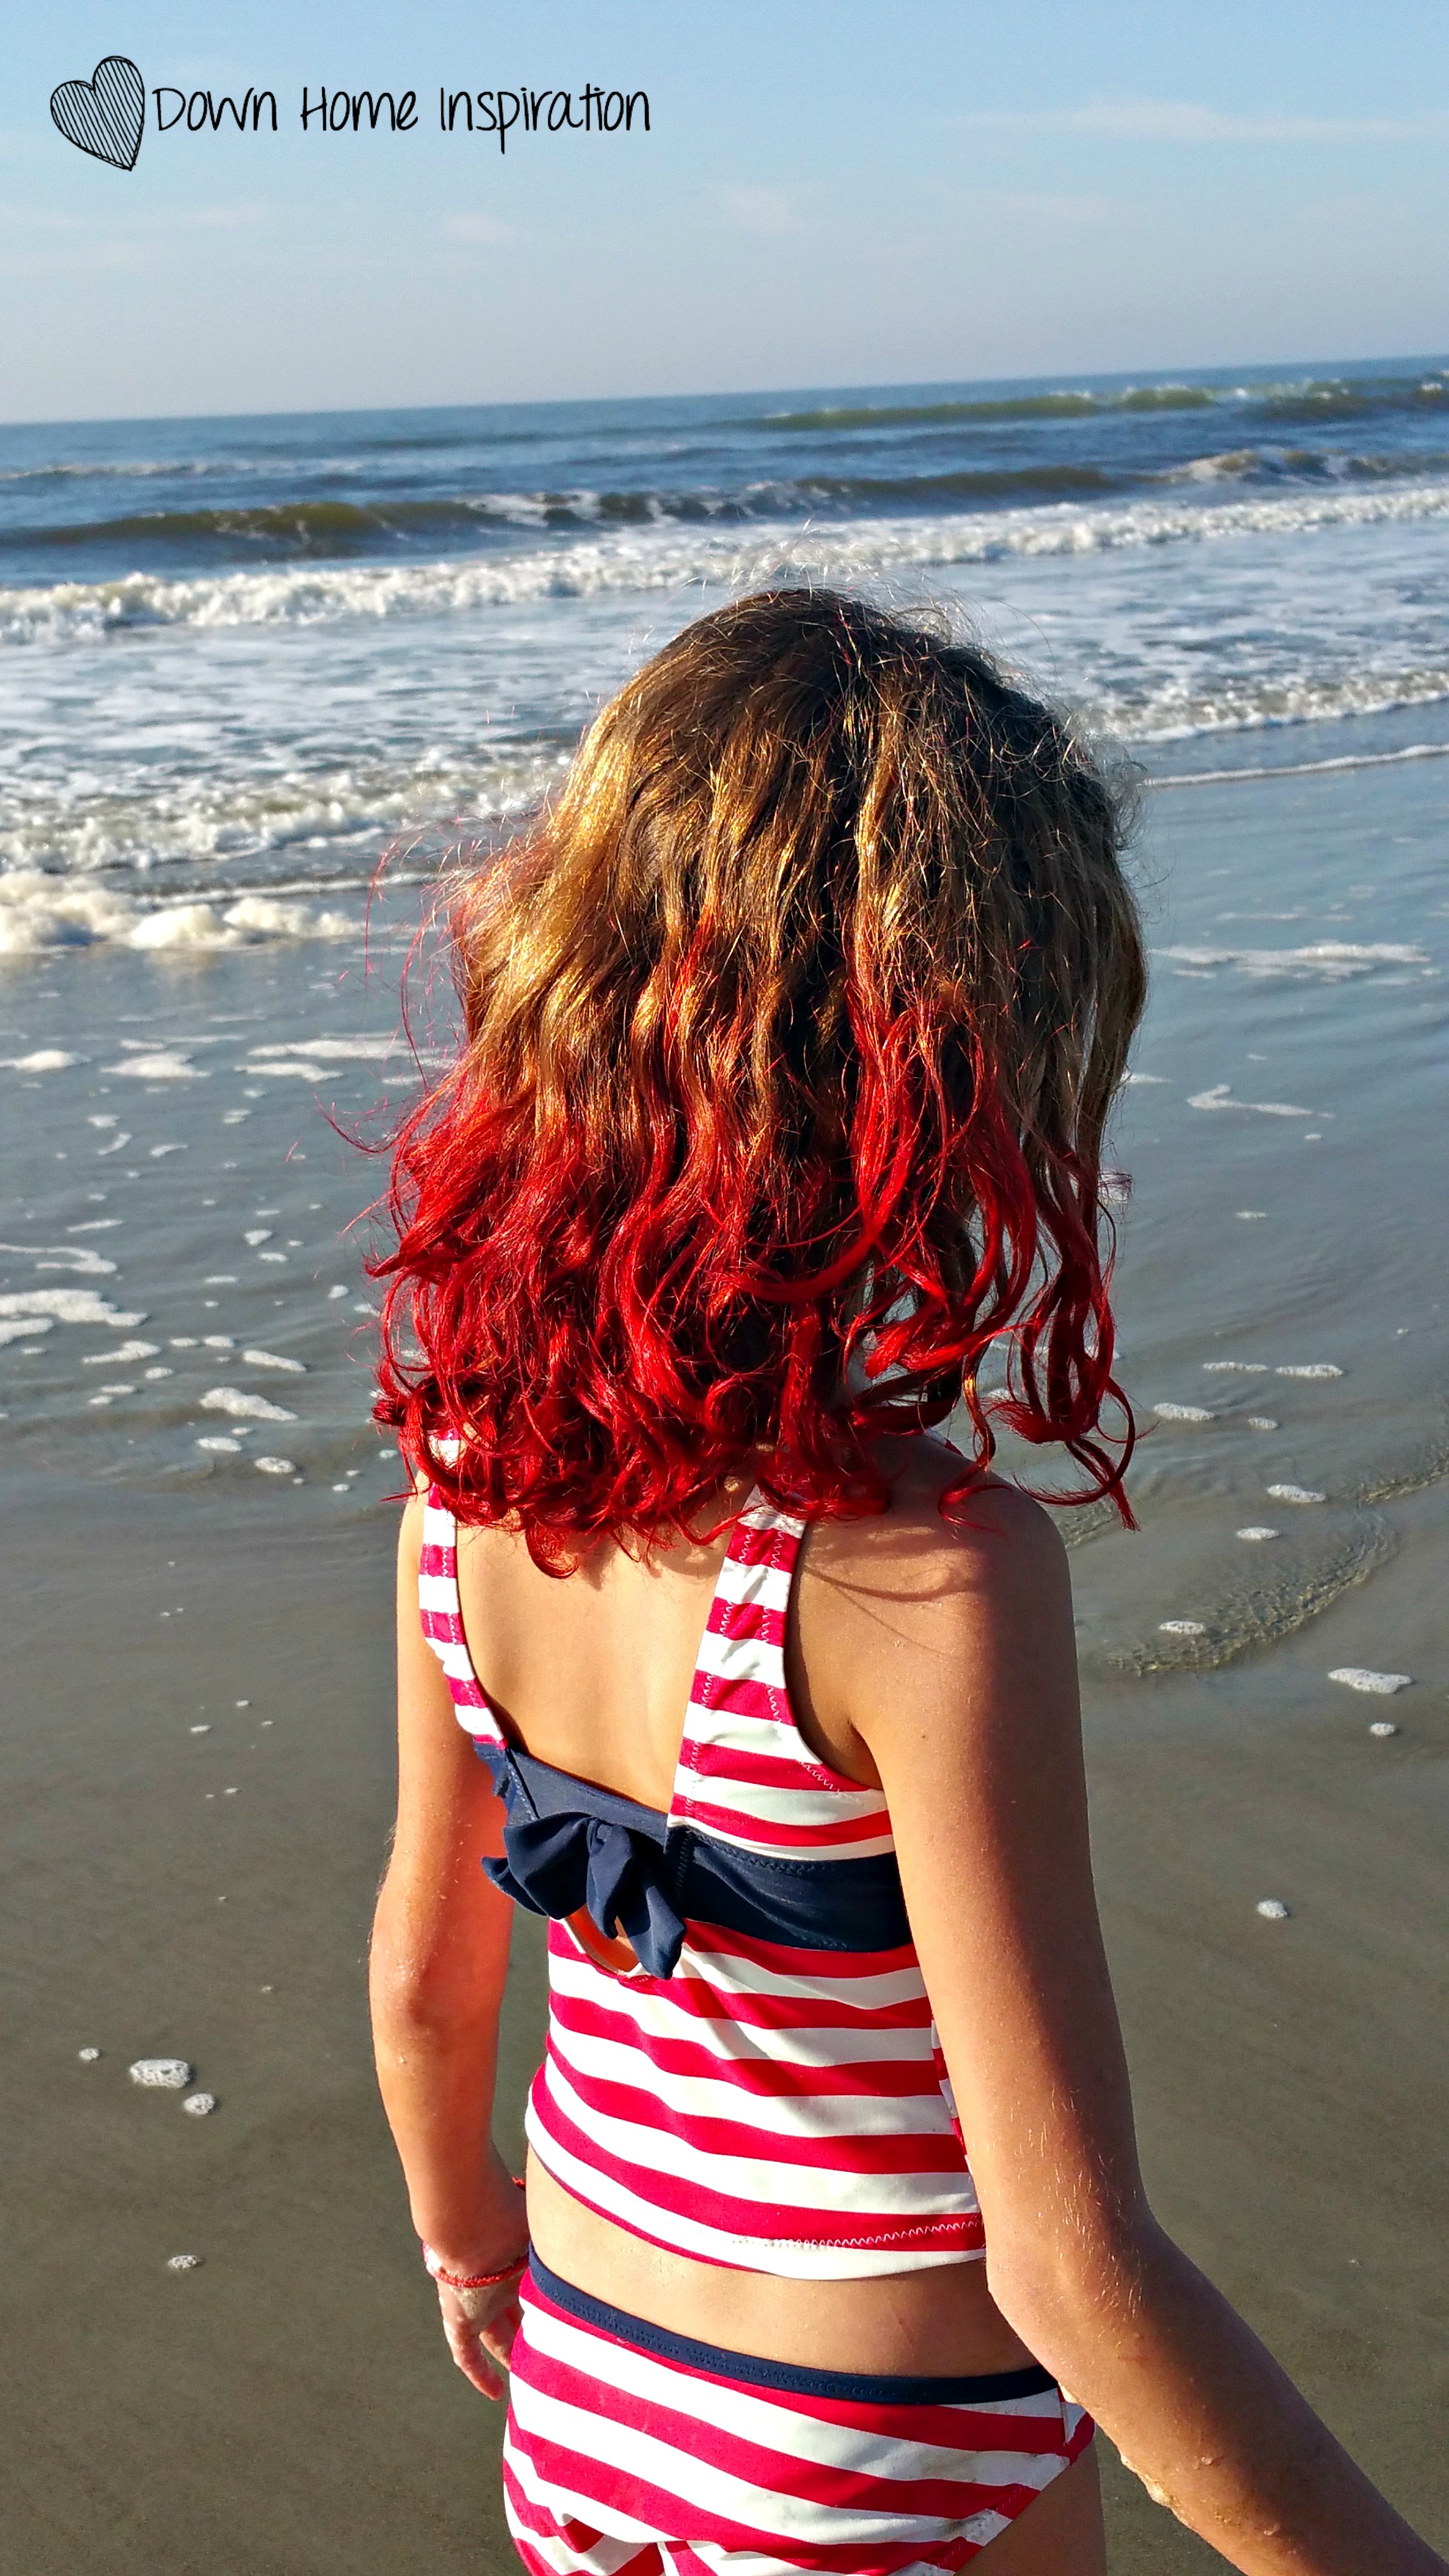 That time I colored my kid's hair with Kool-Aid...you've gotta see this